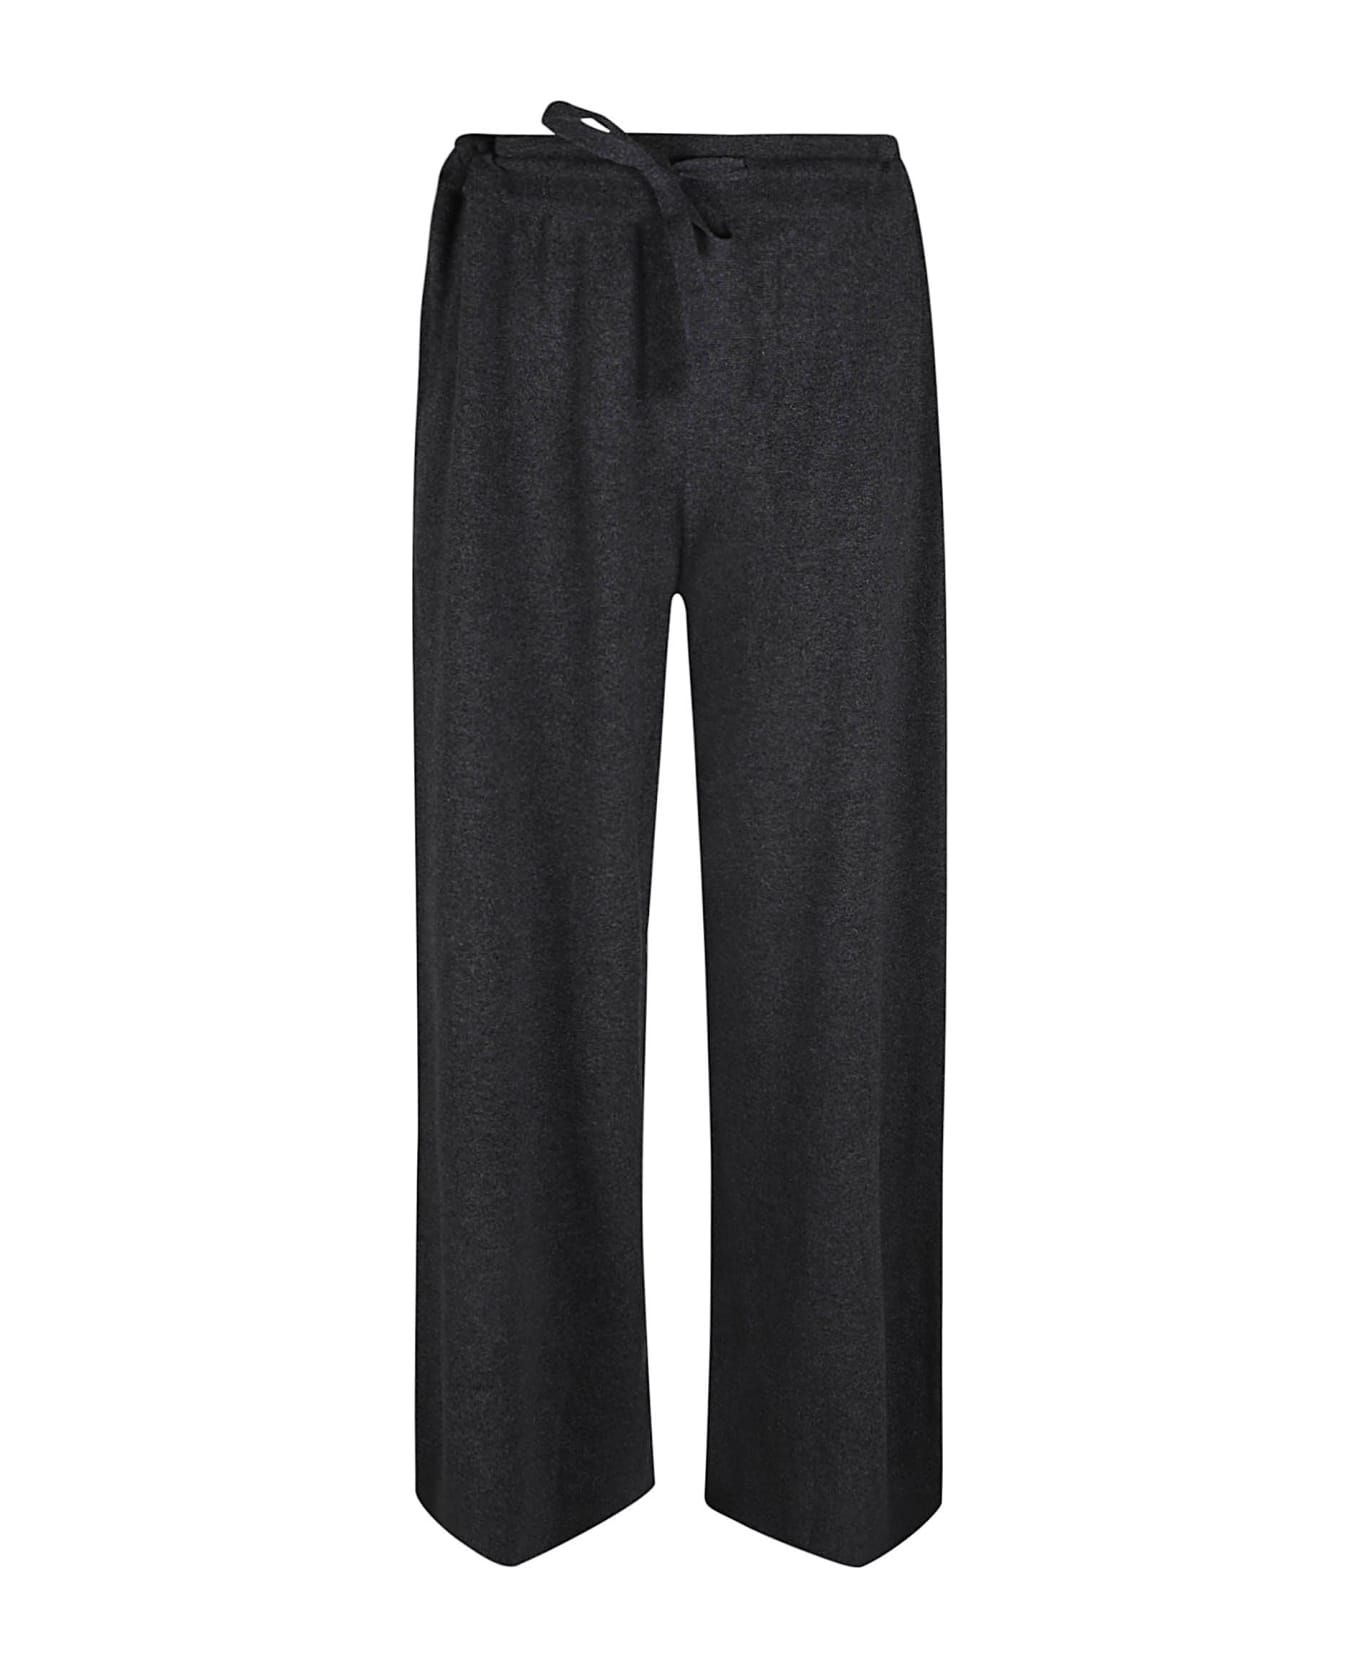 Jil Sander Laced Trousers - Antracite ボトムス